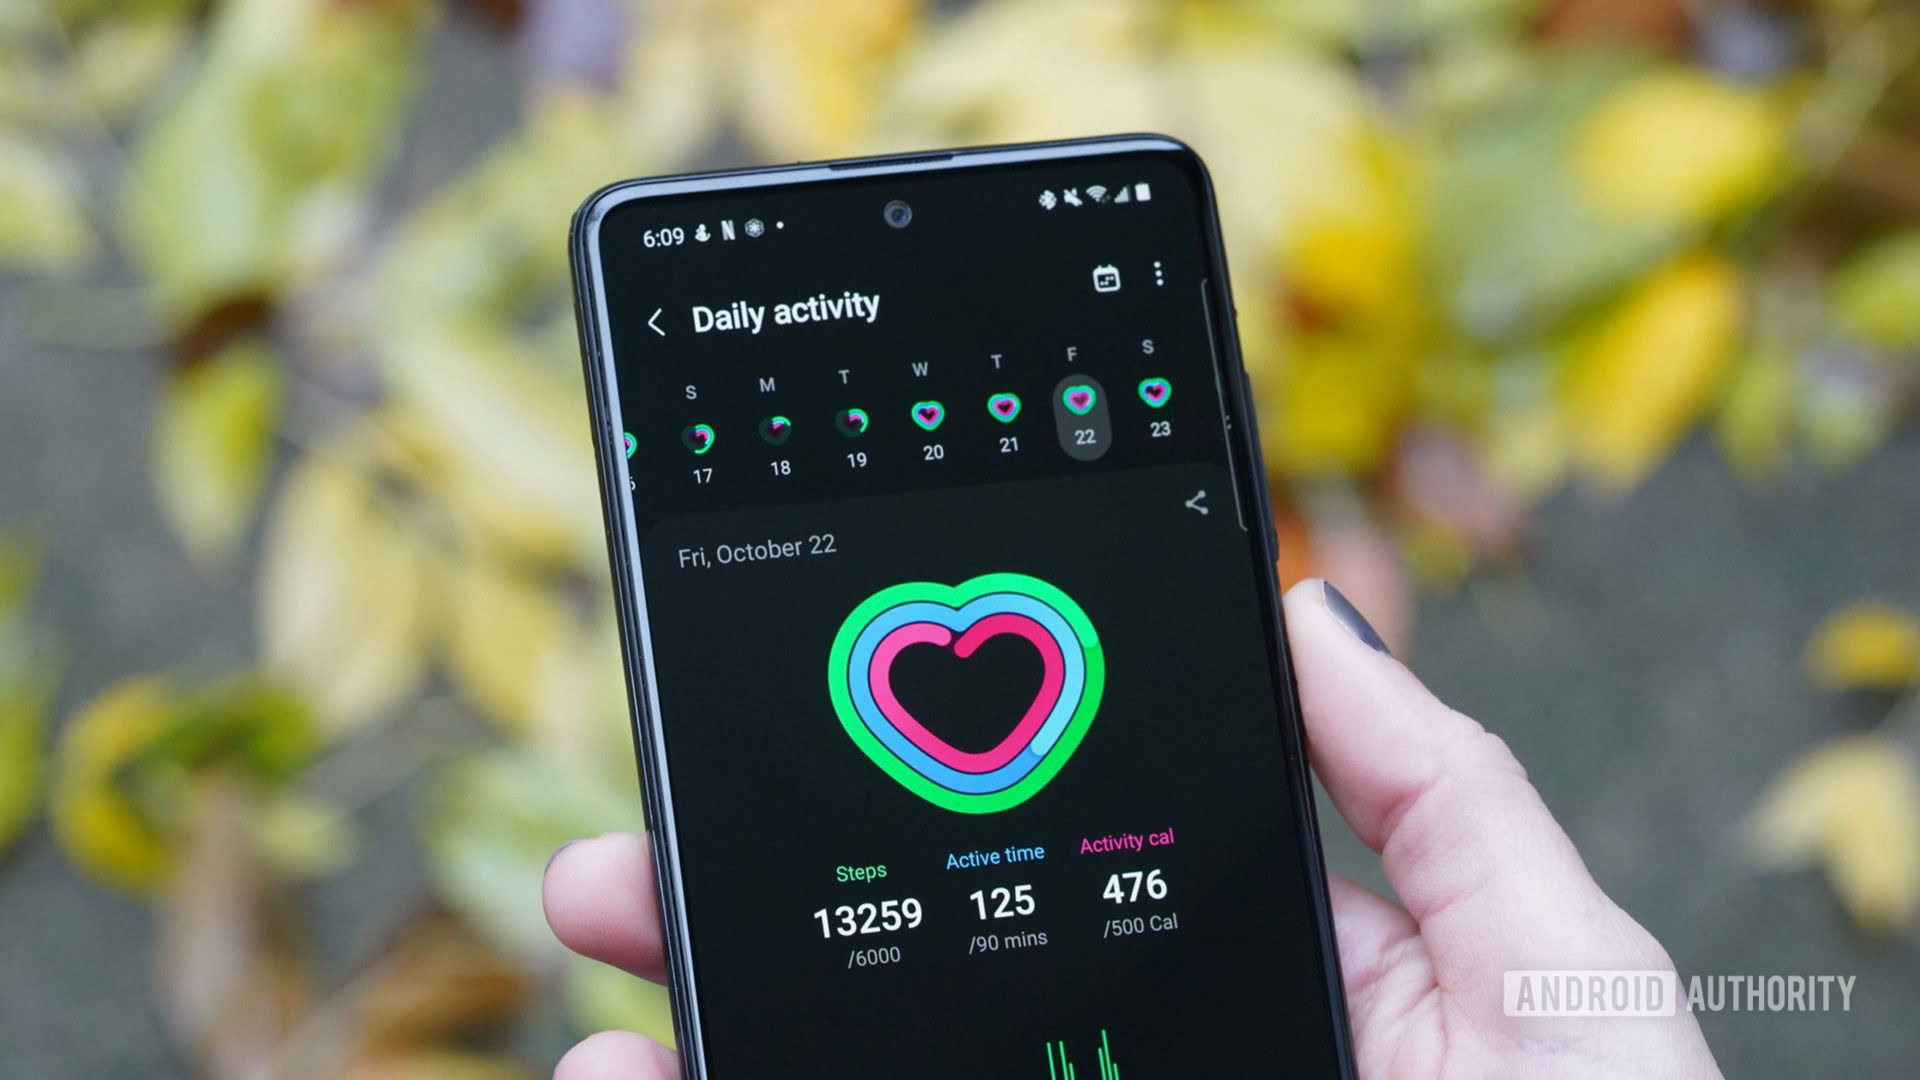 A user reviews her Daily Activity in the Samsung Health app.